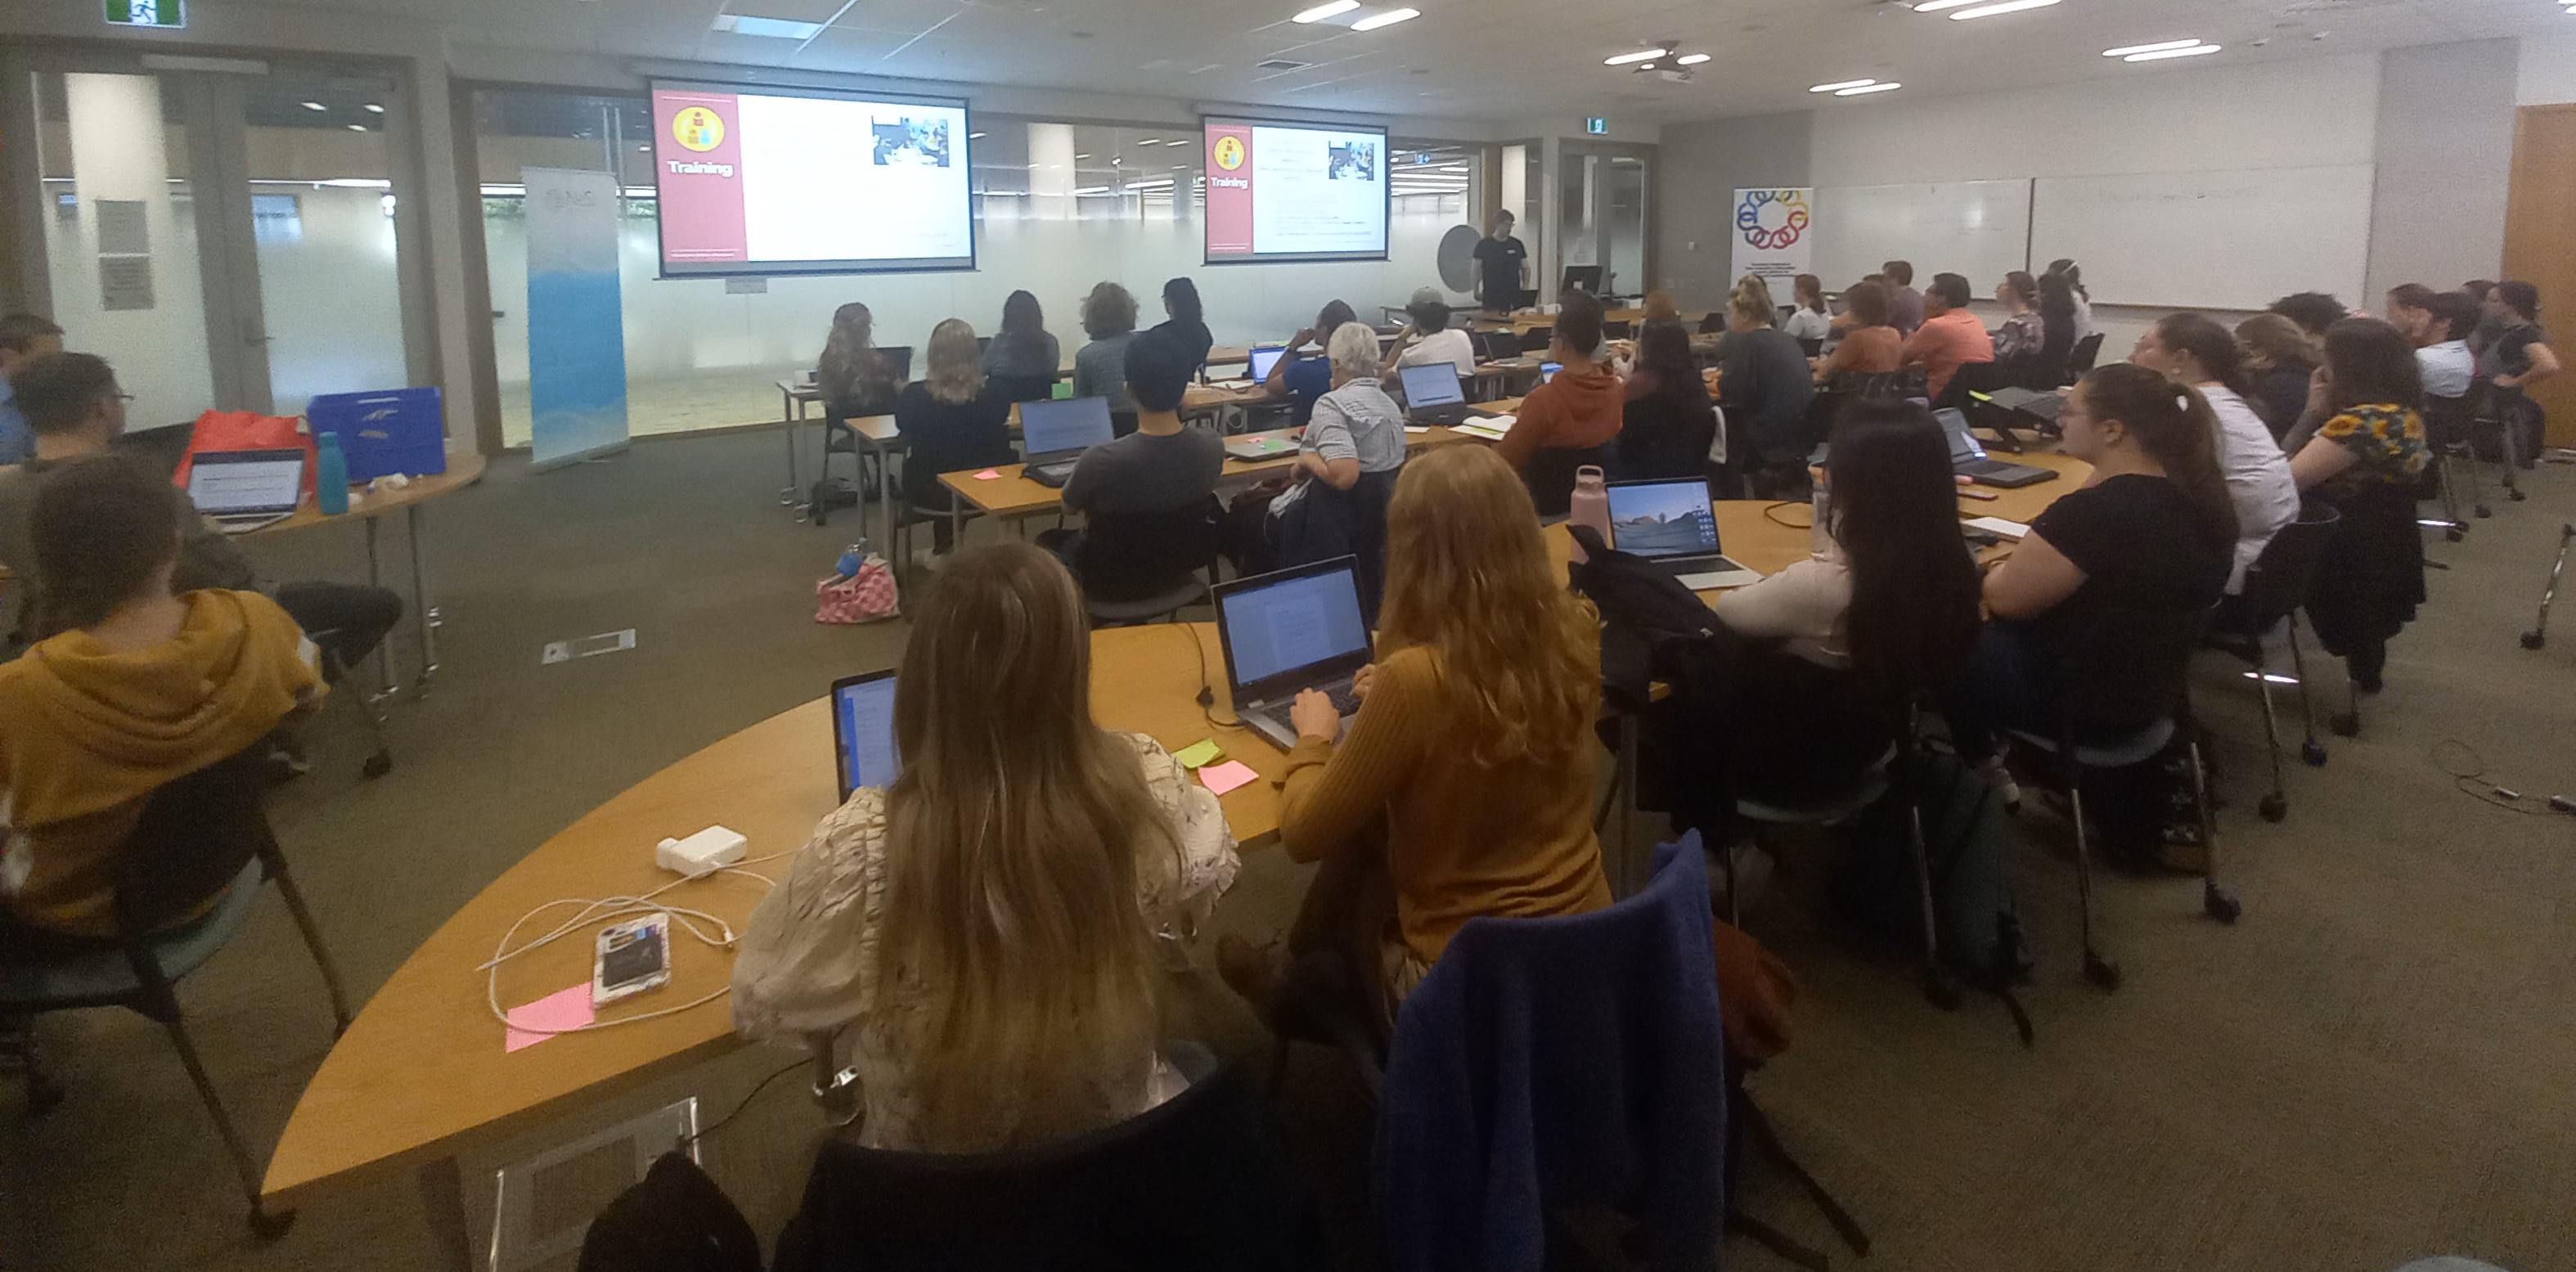 Photo from back of classroom of attendees at Otago Bioinformatics School listening to a presentation.